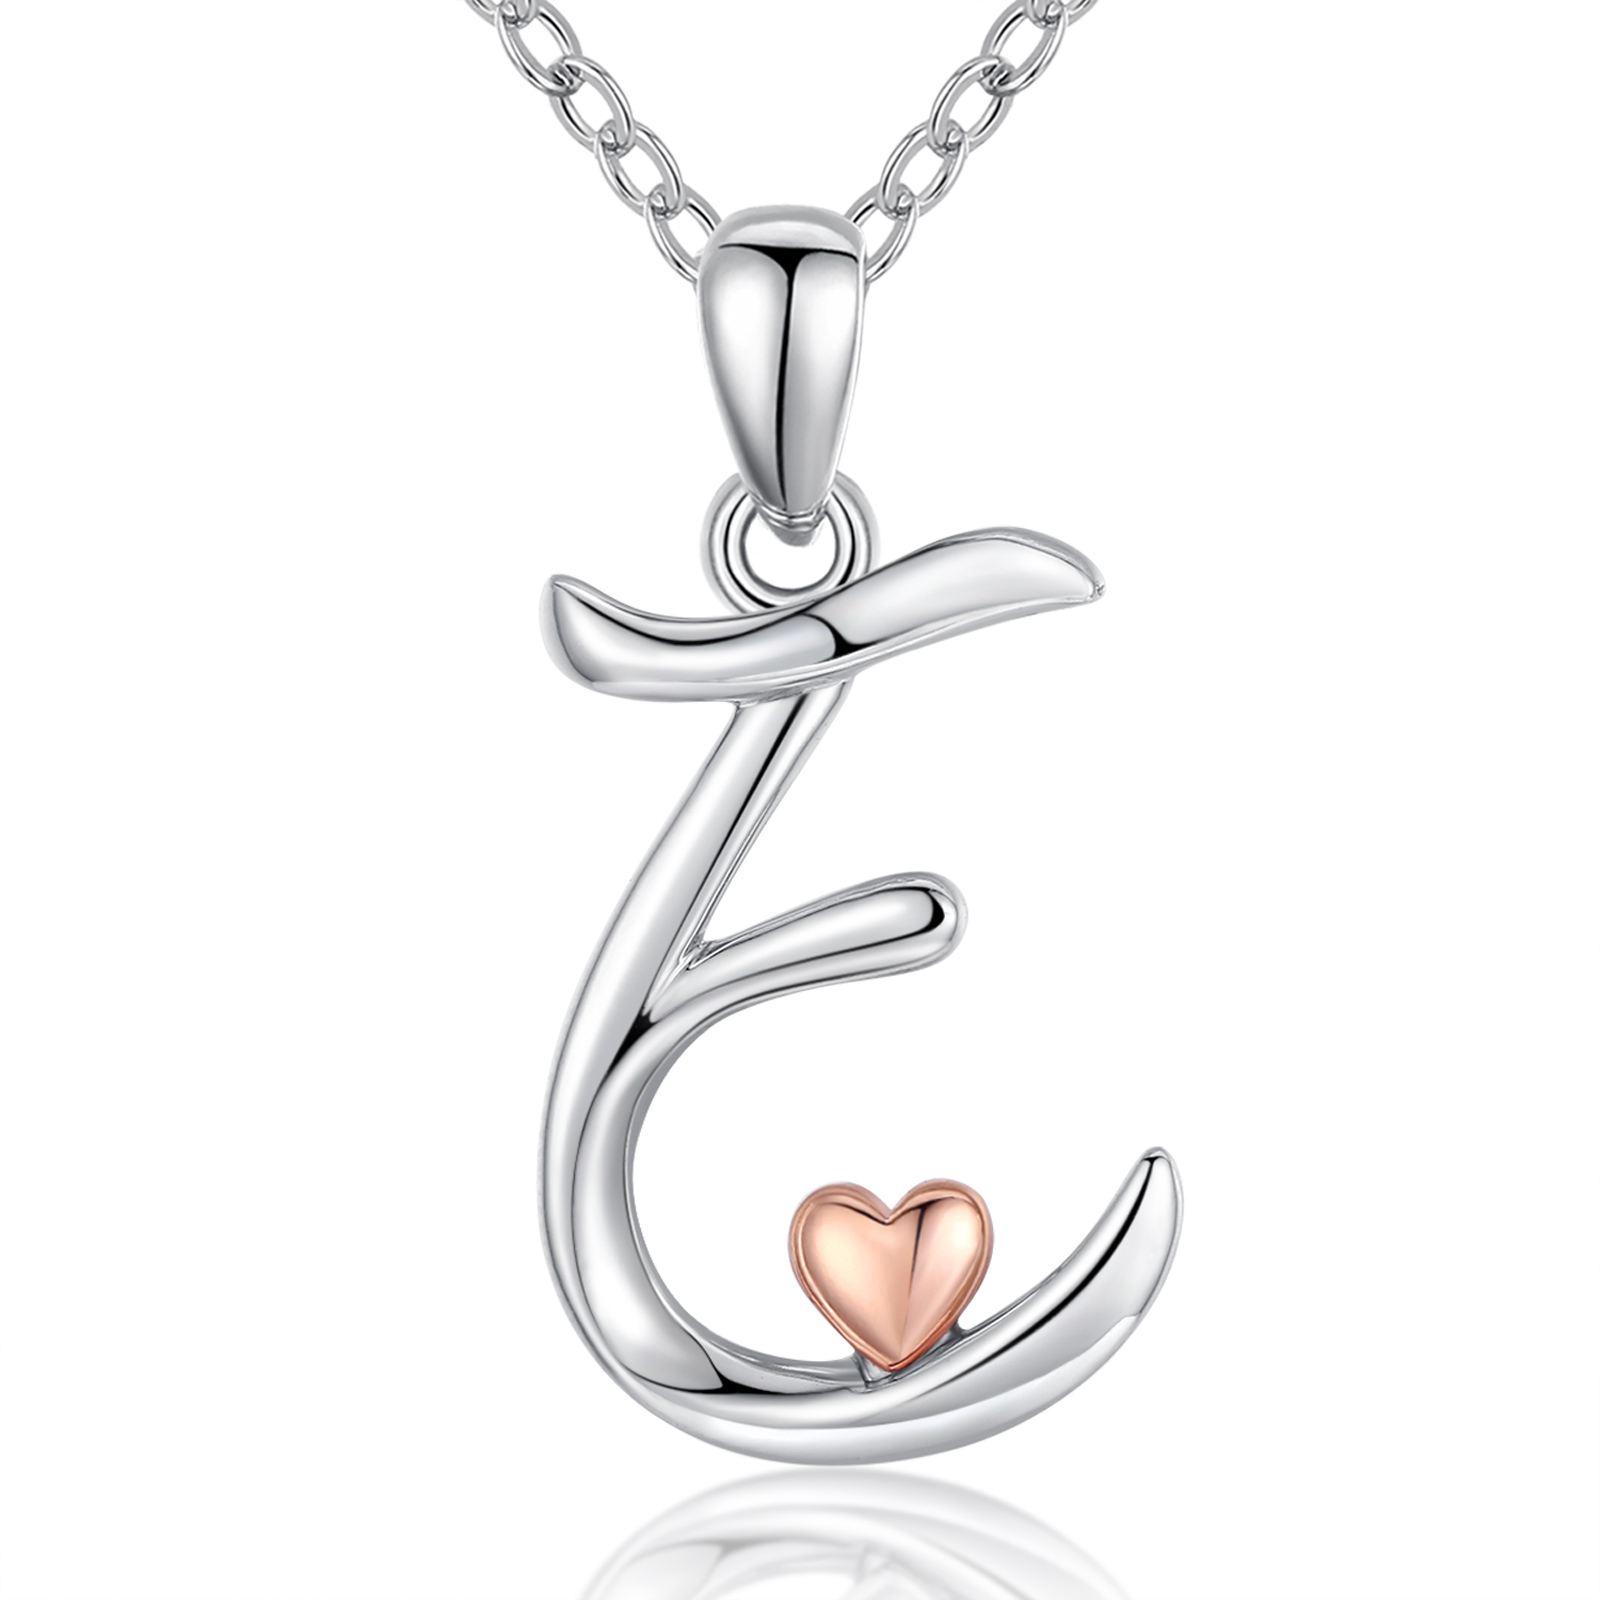 Merryshine Jewelry s925 sterling silver plated rhodium larget initial letter E jewellery alphabet necklace